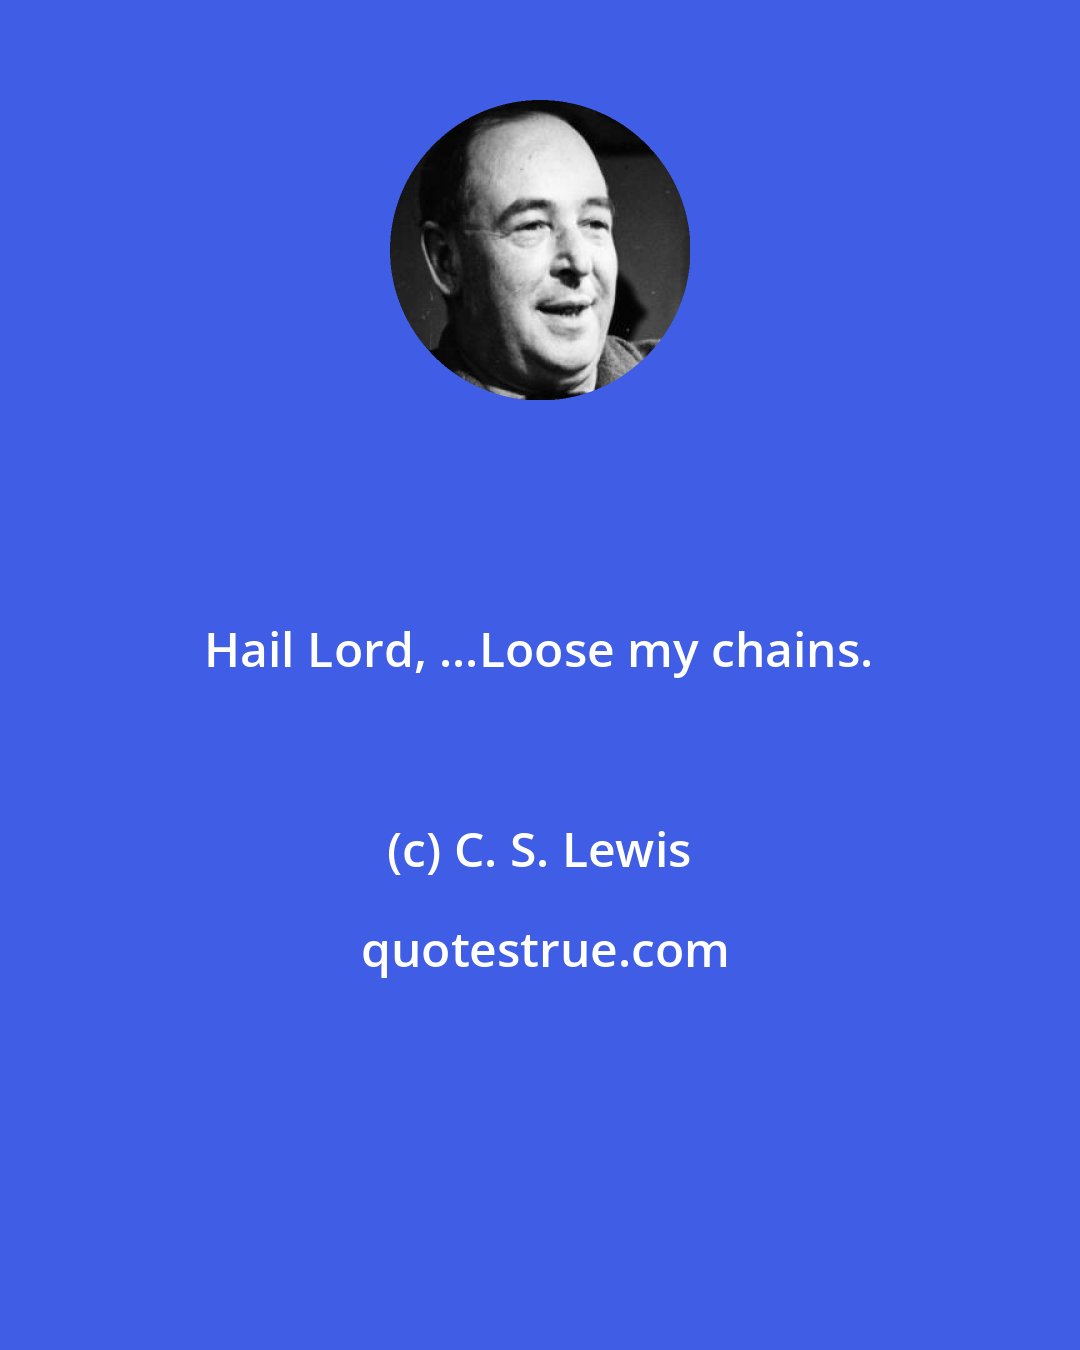 C. S. Lewis: Hail Lord, ...Loose my chains.